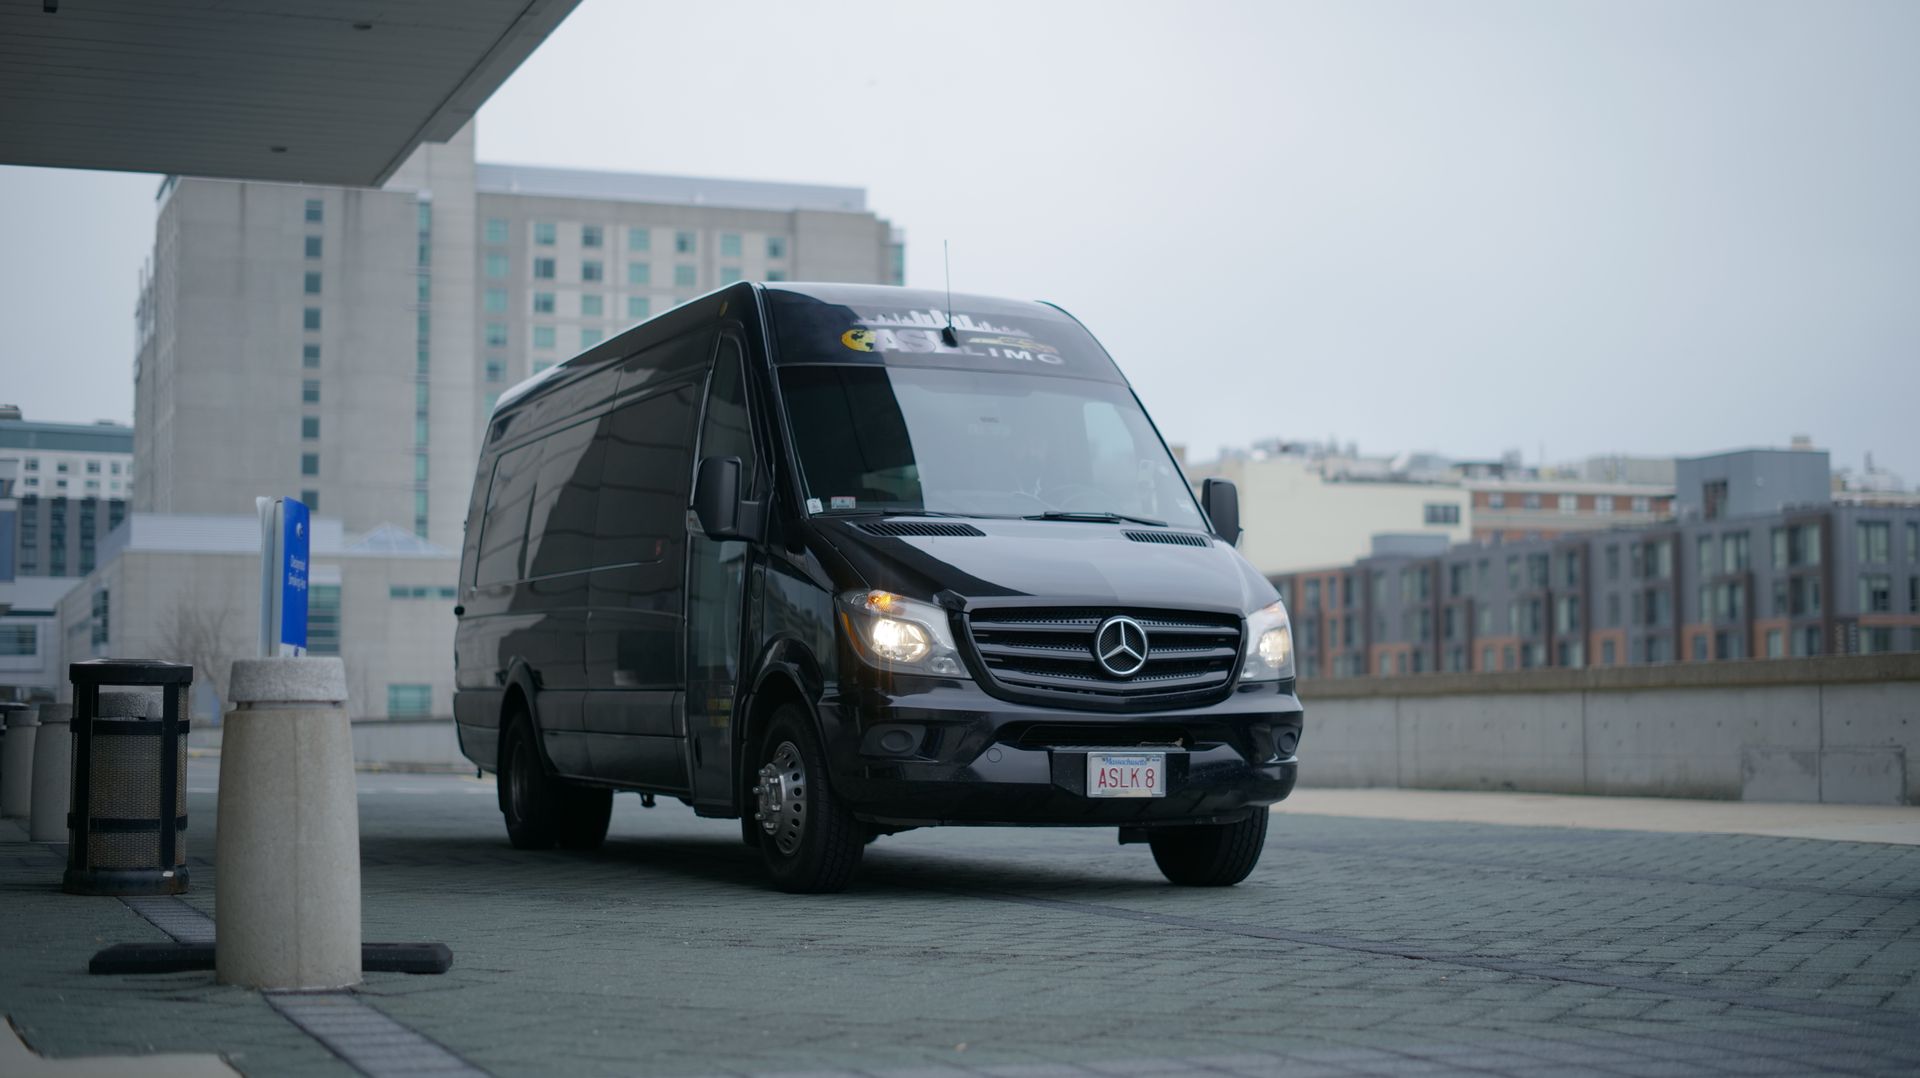 a black sprinter van is parked in a parking lot in front of a building .